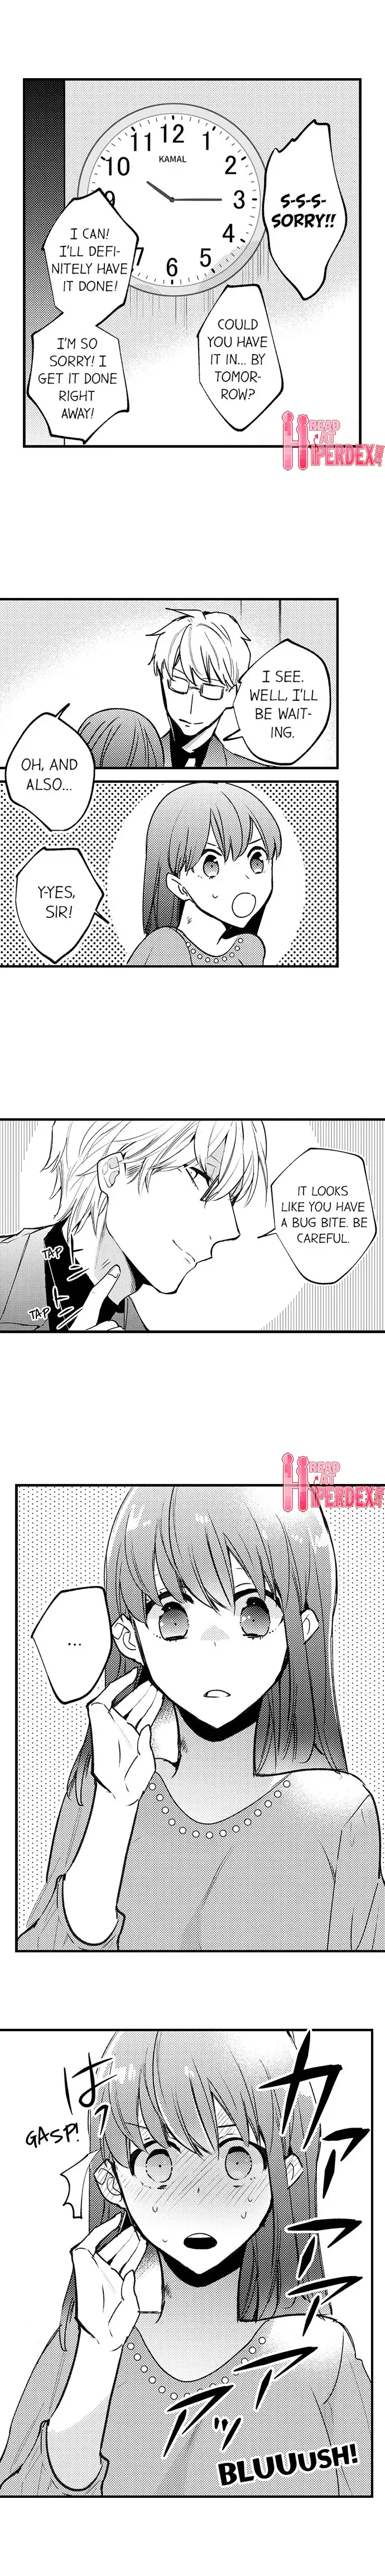 3 Hours + Love Hotel = You’re Mine - Chapter 7 Page 6